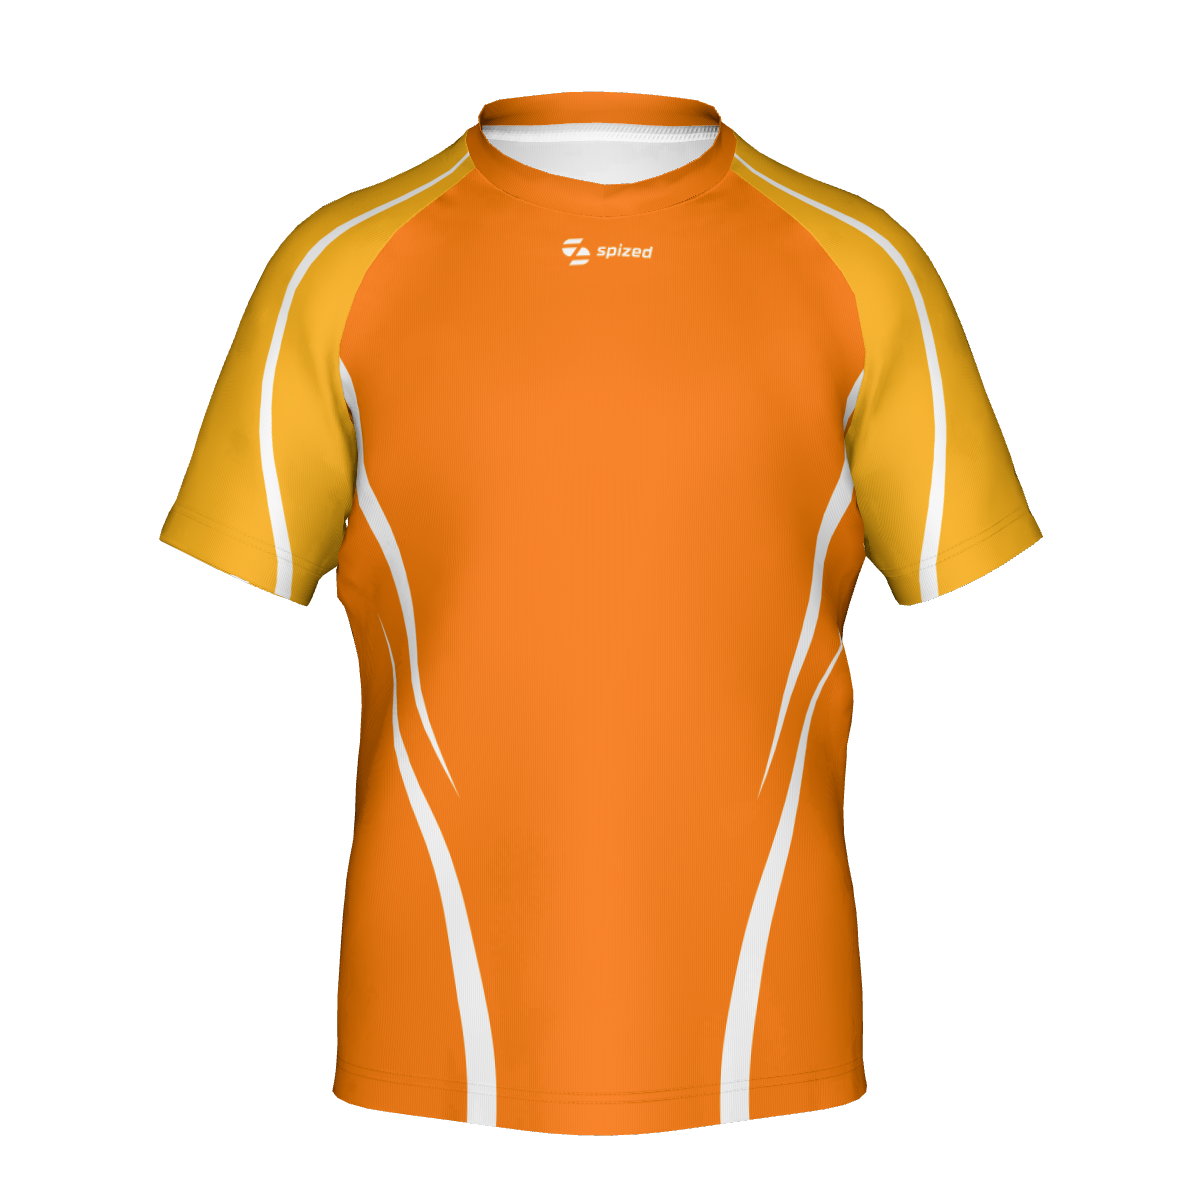 Ace boy’s volleyball jersey